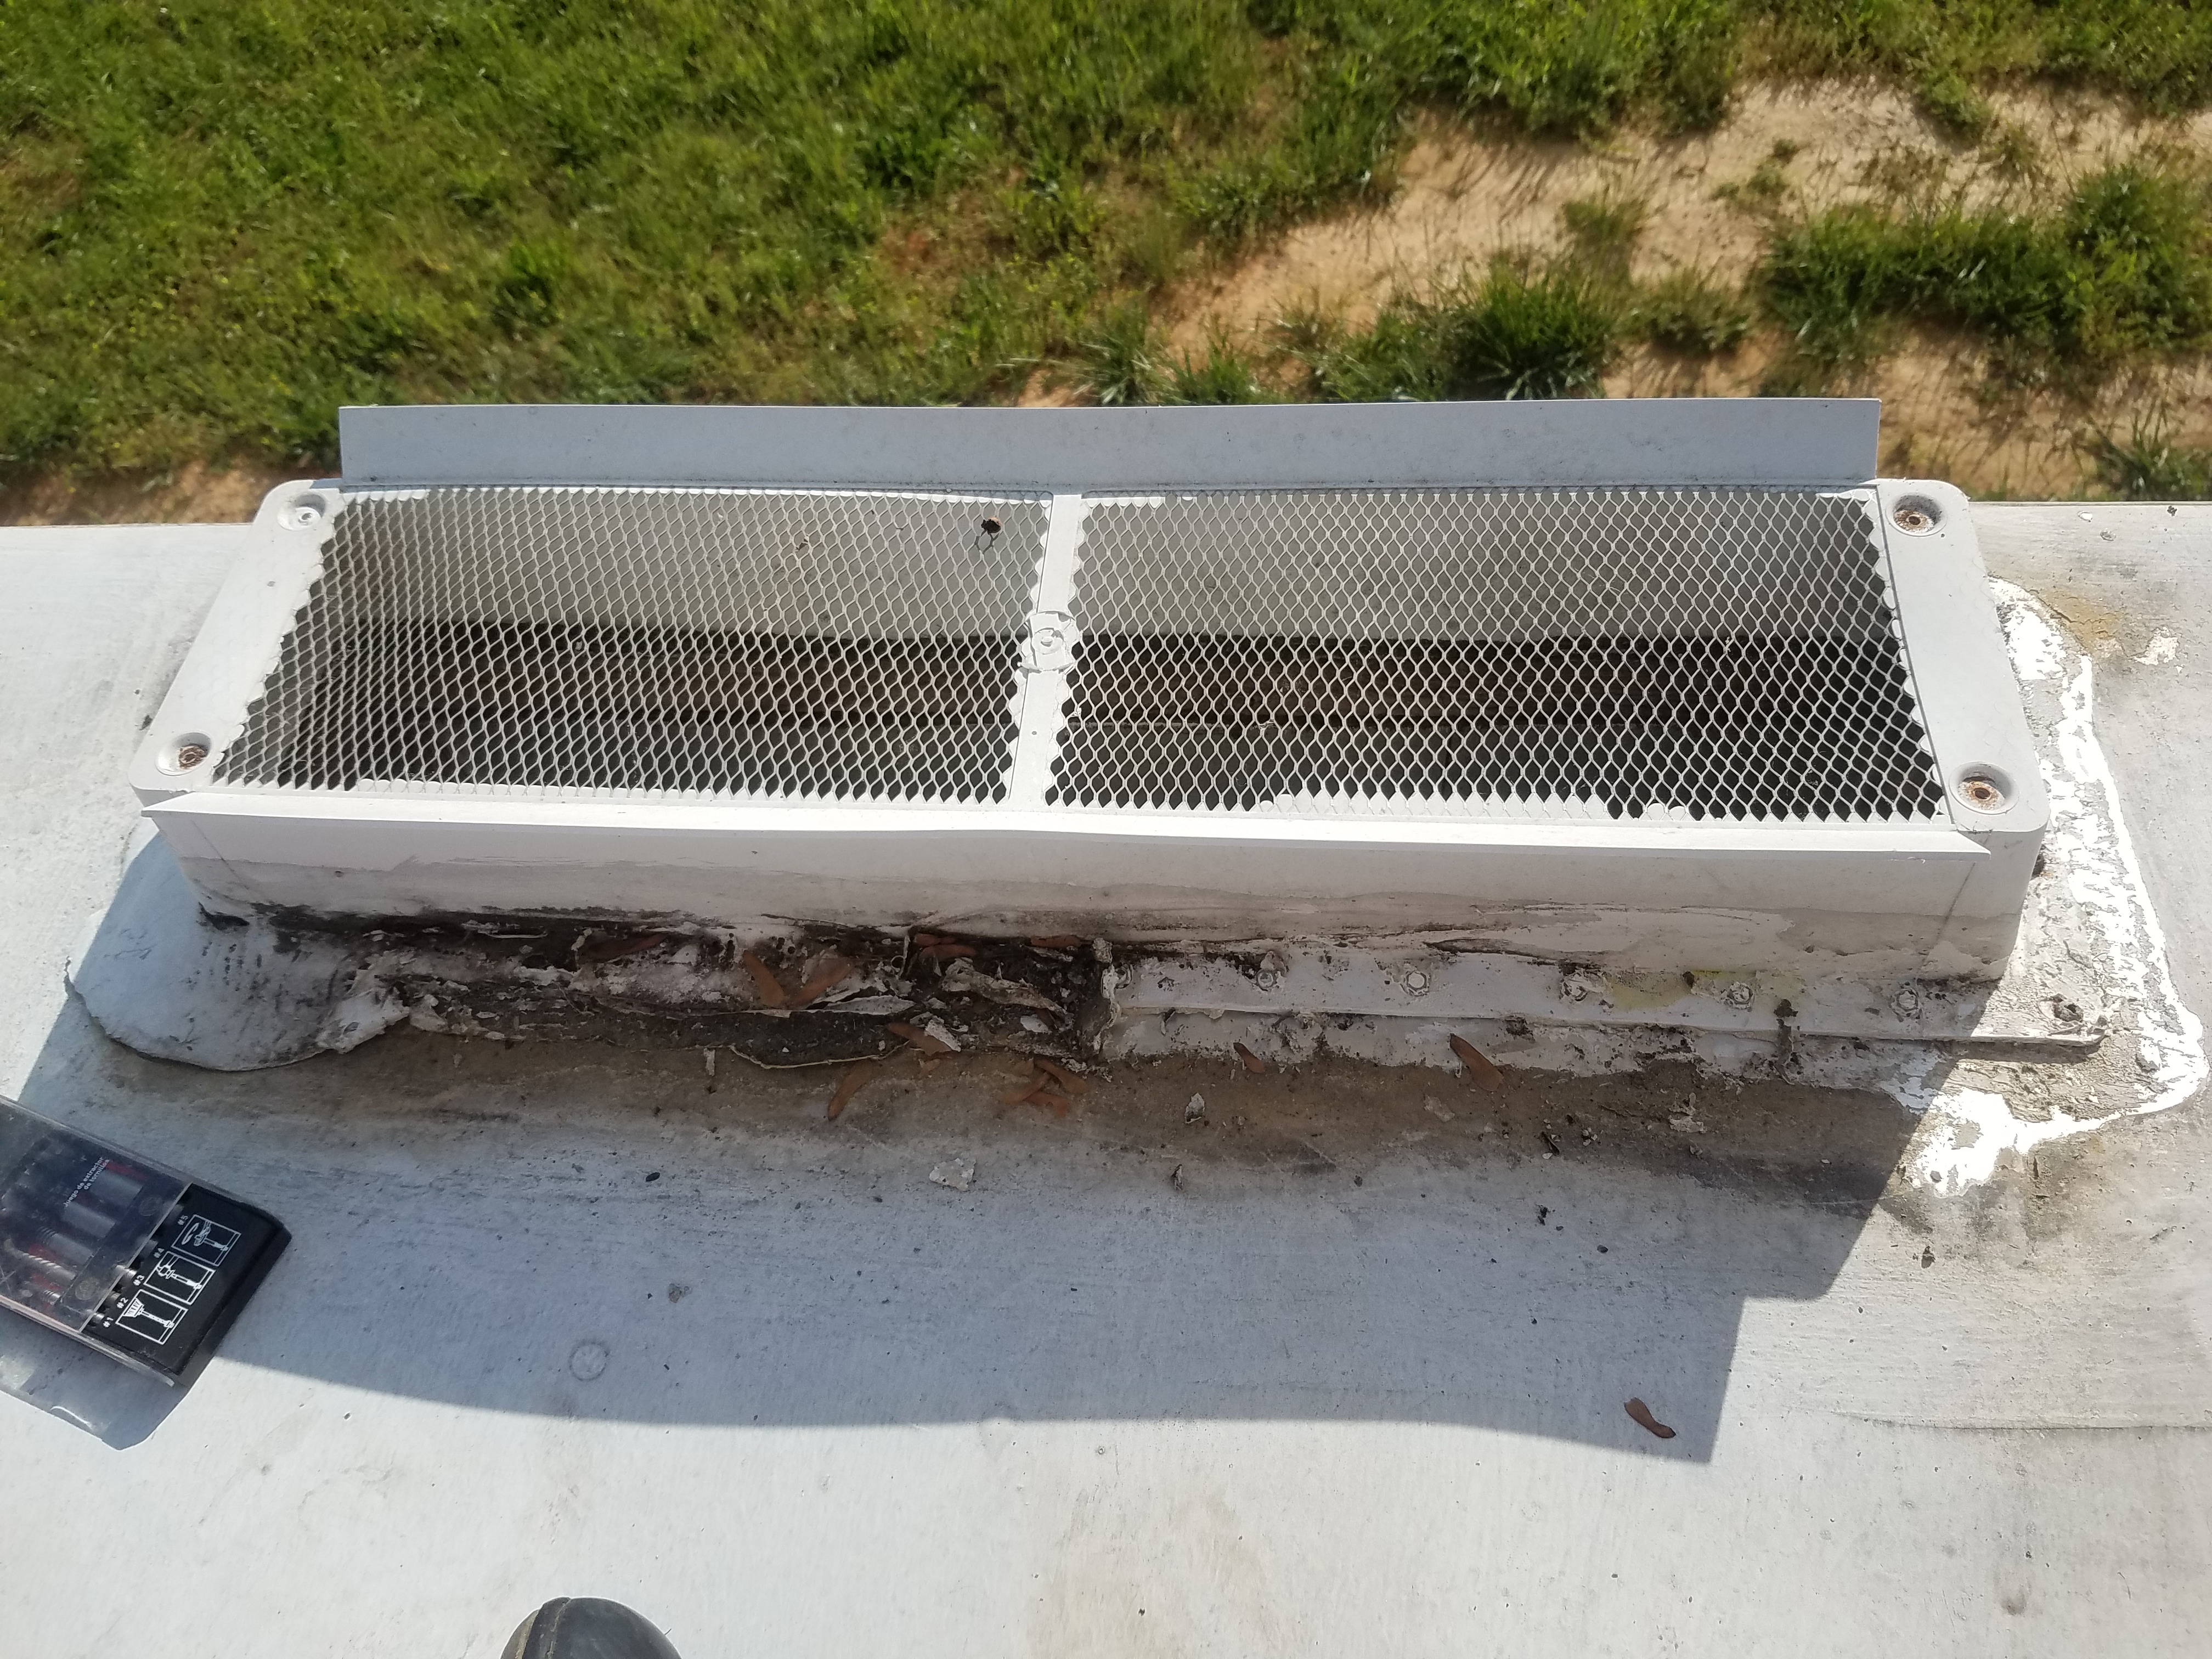 Refridgerator vent without its cover on the roof of he travel trailer